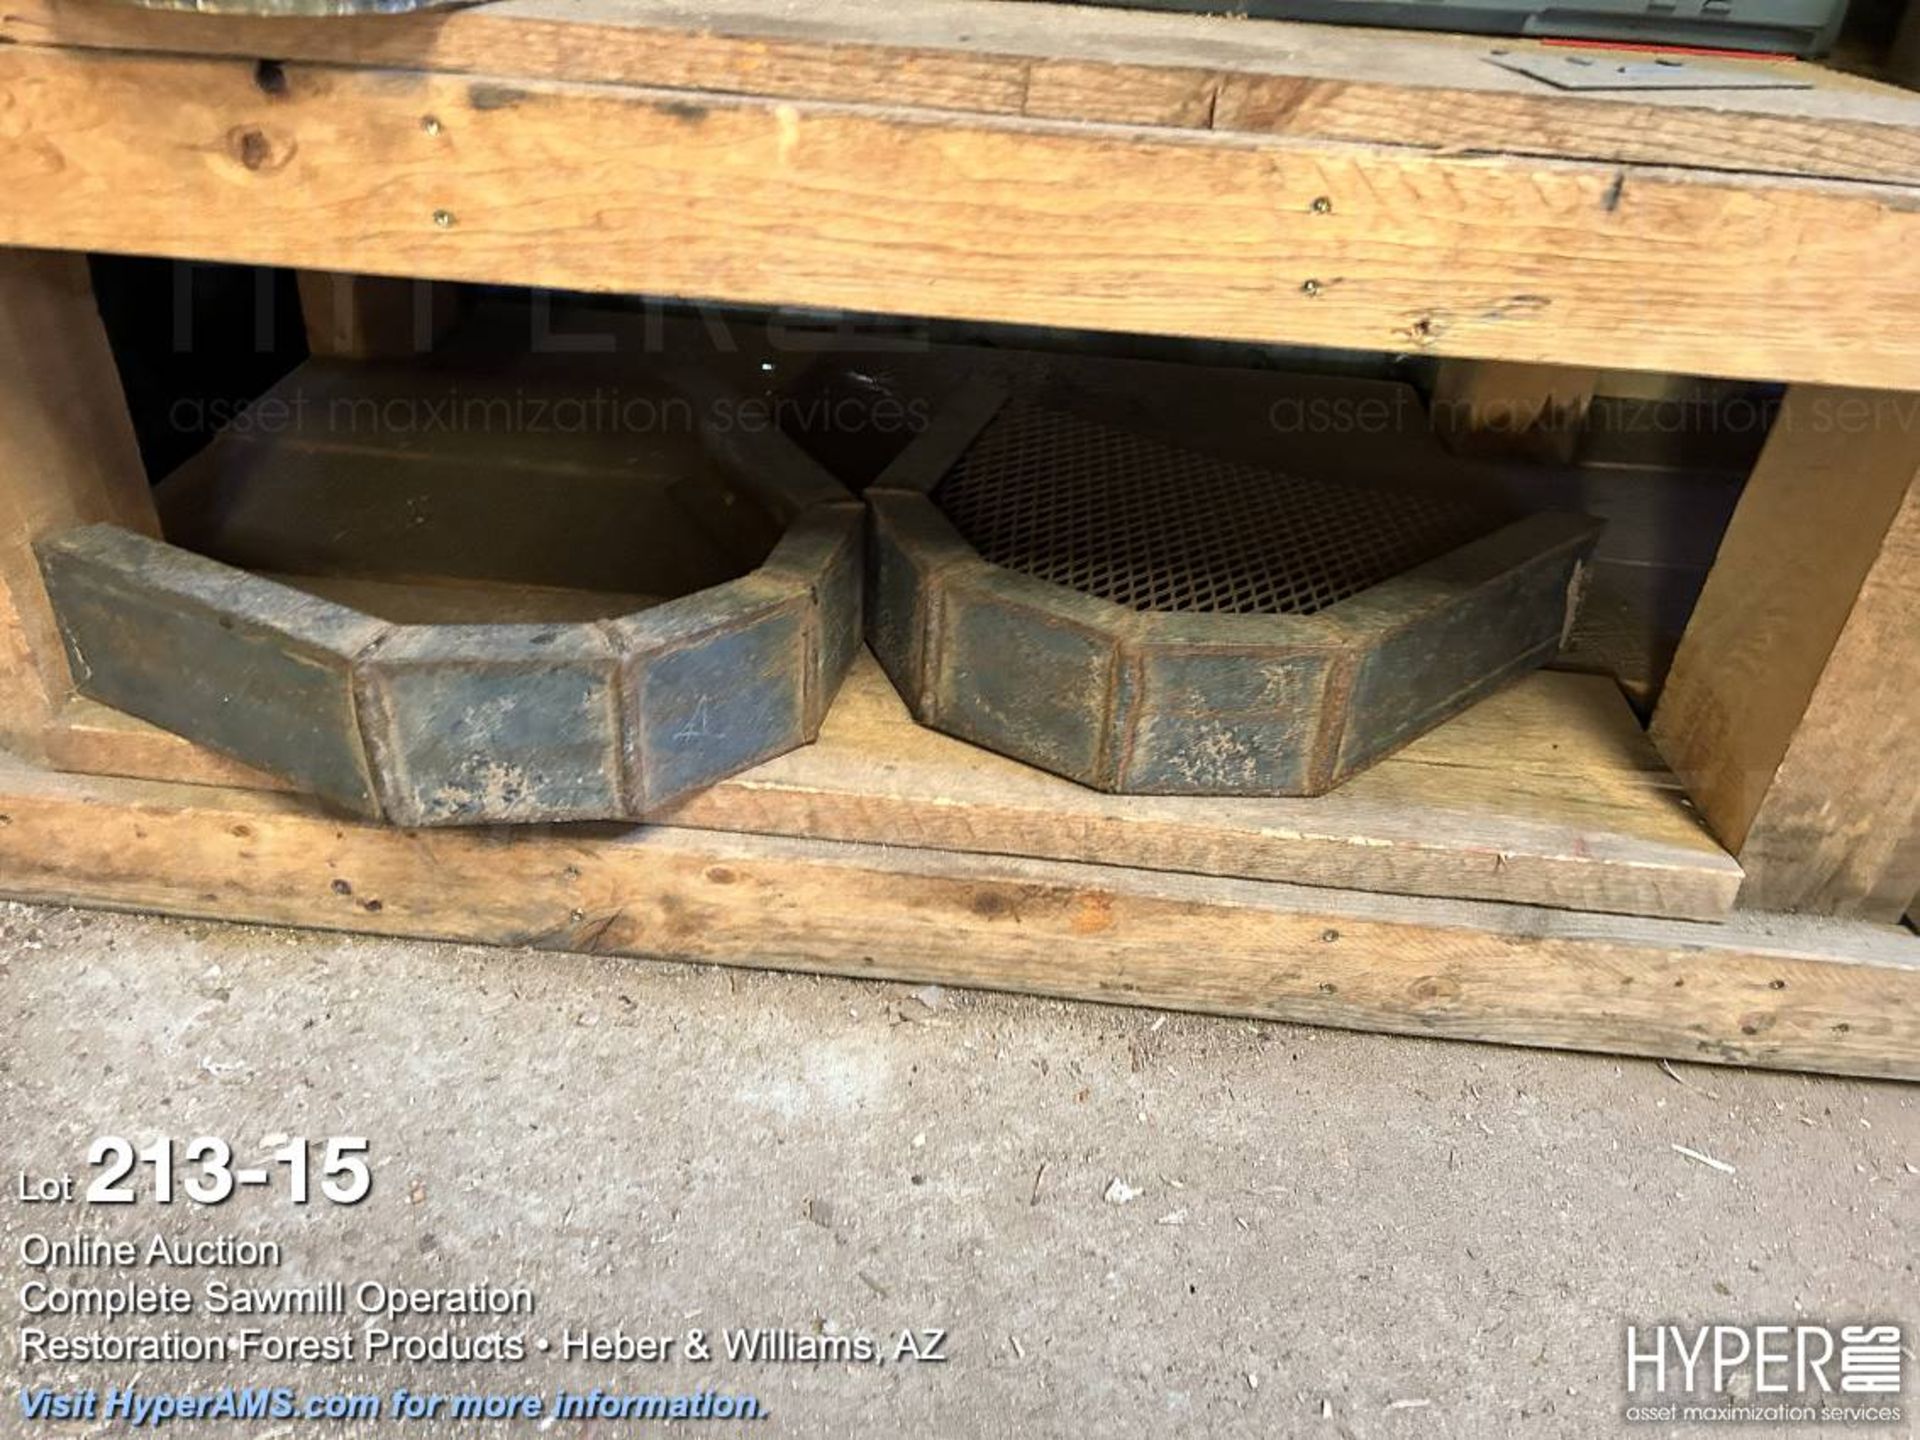 Lot: Wood shelf with cabinets, washers, bolts, screws, and tooling - Image 15 of 16